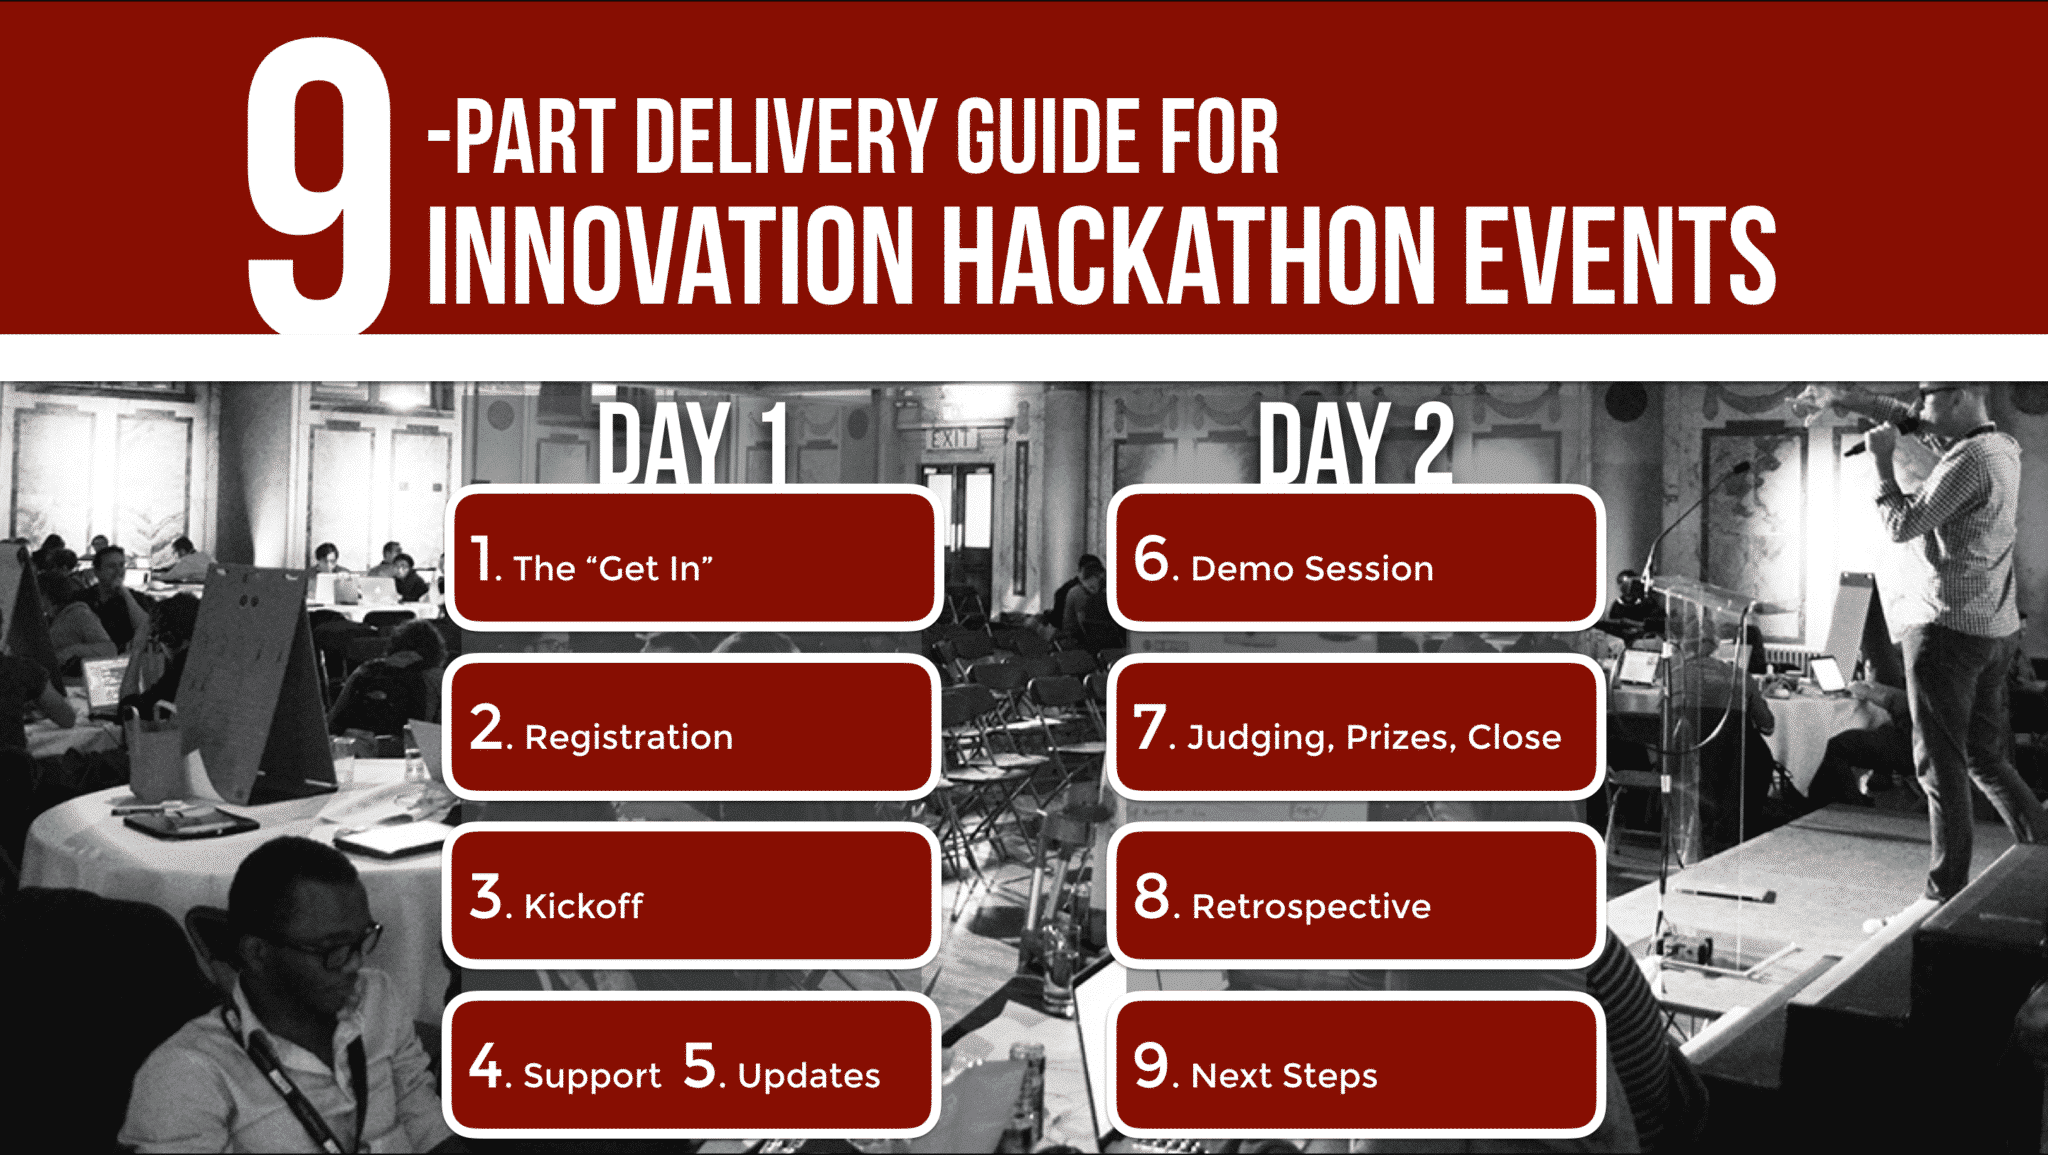 Delivery Guide and template for an Innovation Hackathon Event